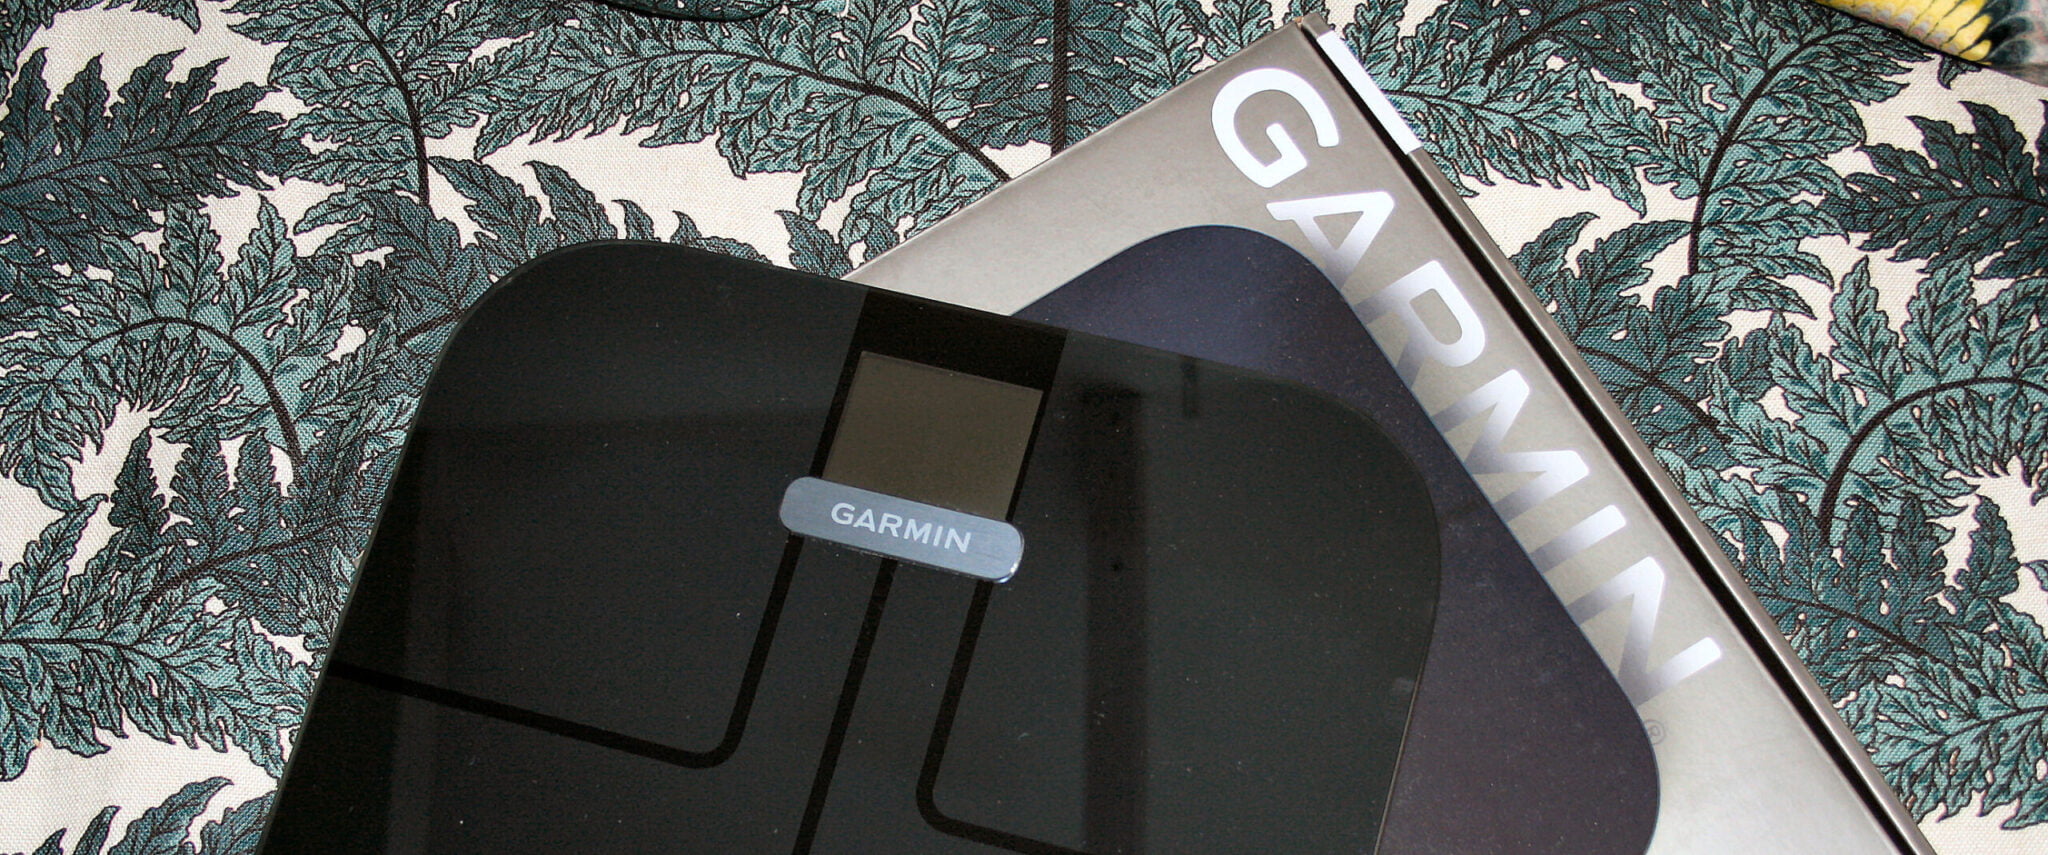 Garmin Index Scale Review S2 Smart WiFi Specifications